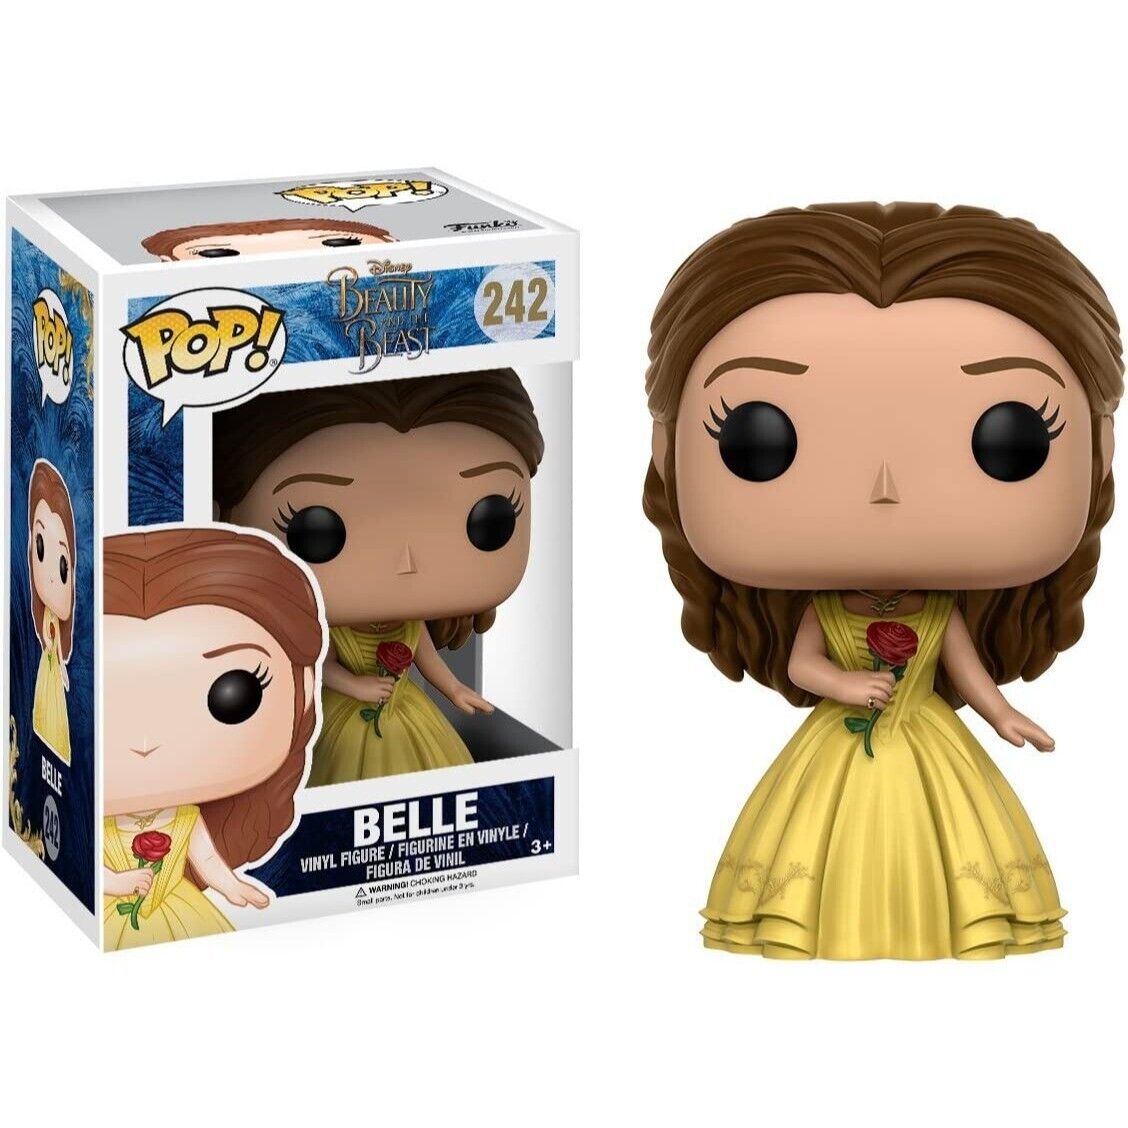 FUNKO Pop Belle with rose 242 Beauty and the Beast Disney with Protector